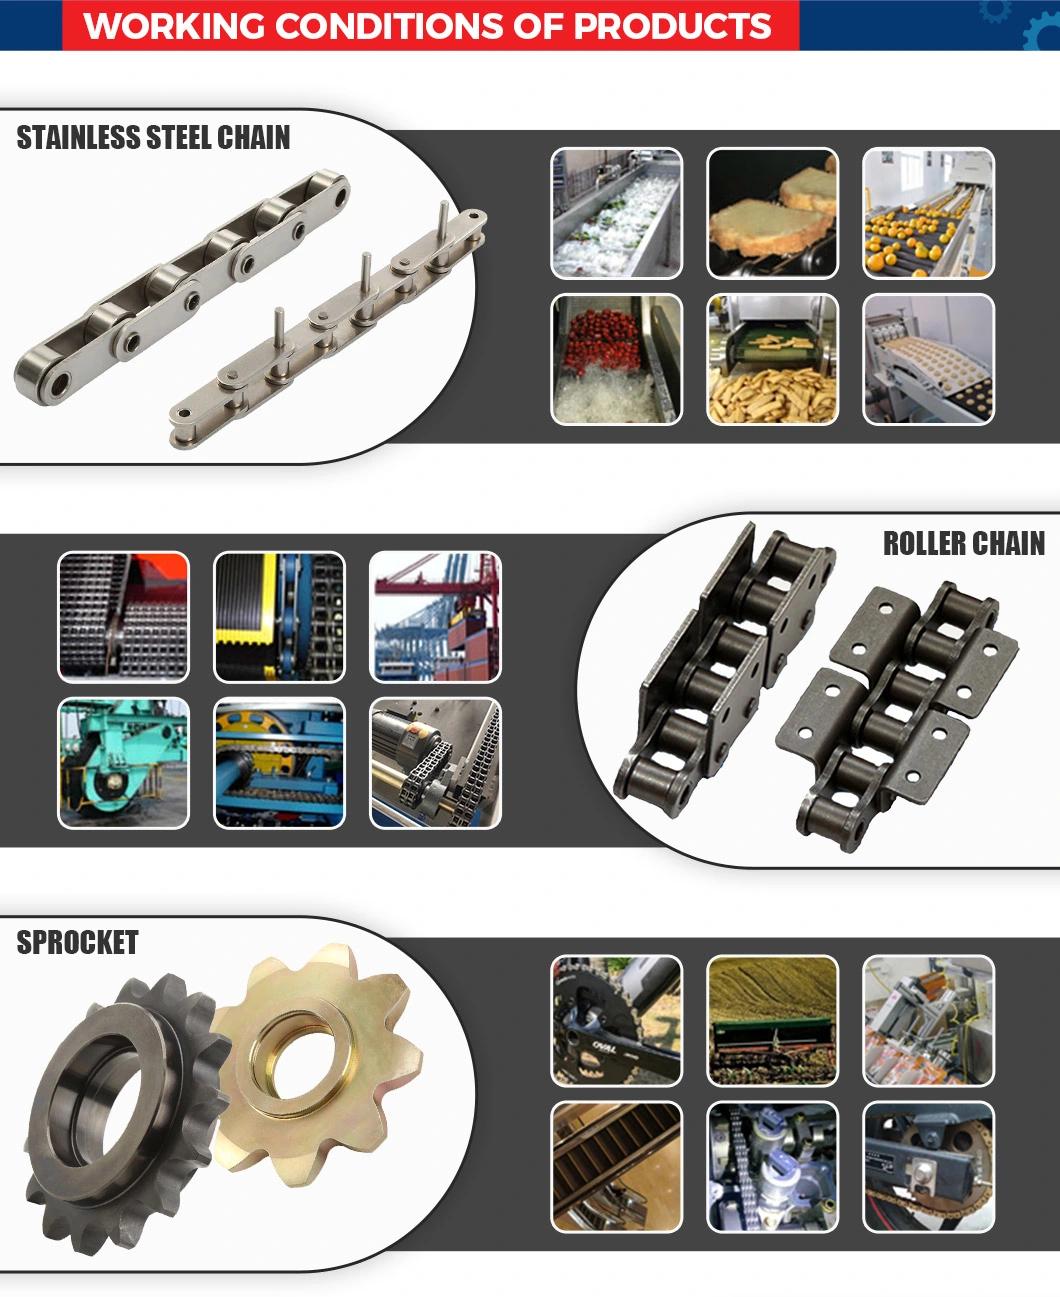 Agriculture Machinery Parts Made in China Agricultural Conveyor Chain